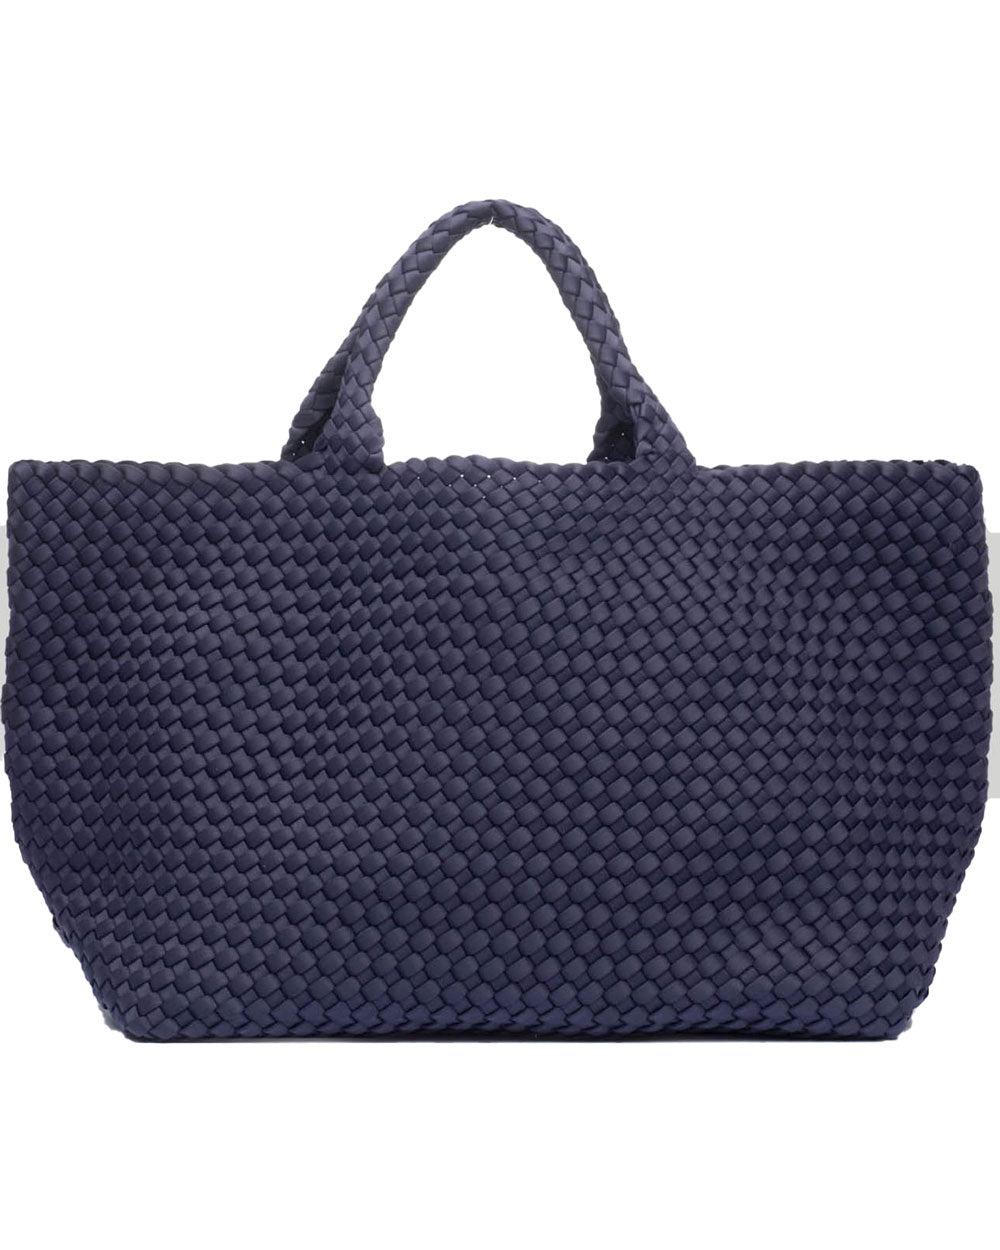 St. Barths Large Tote in Ink